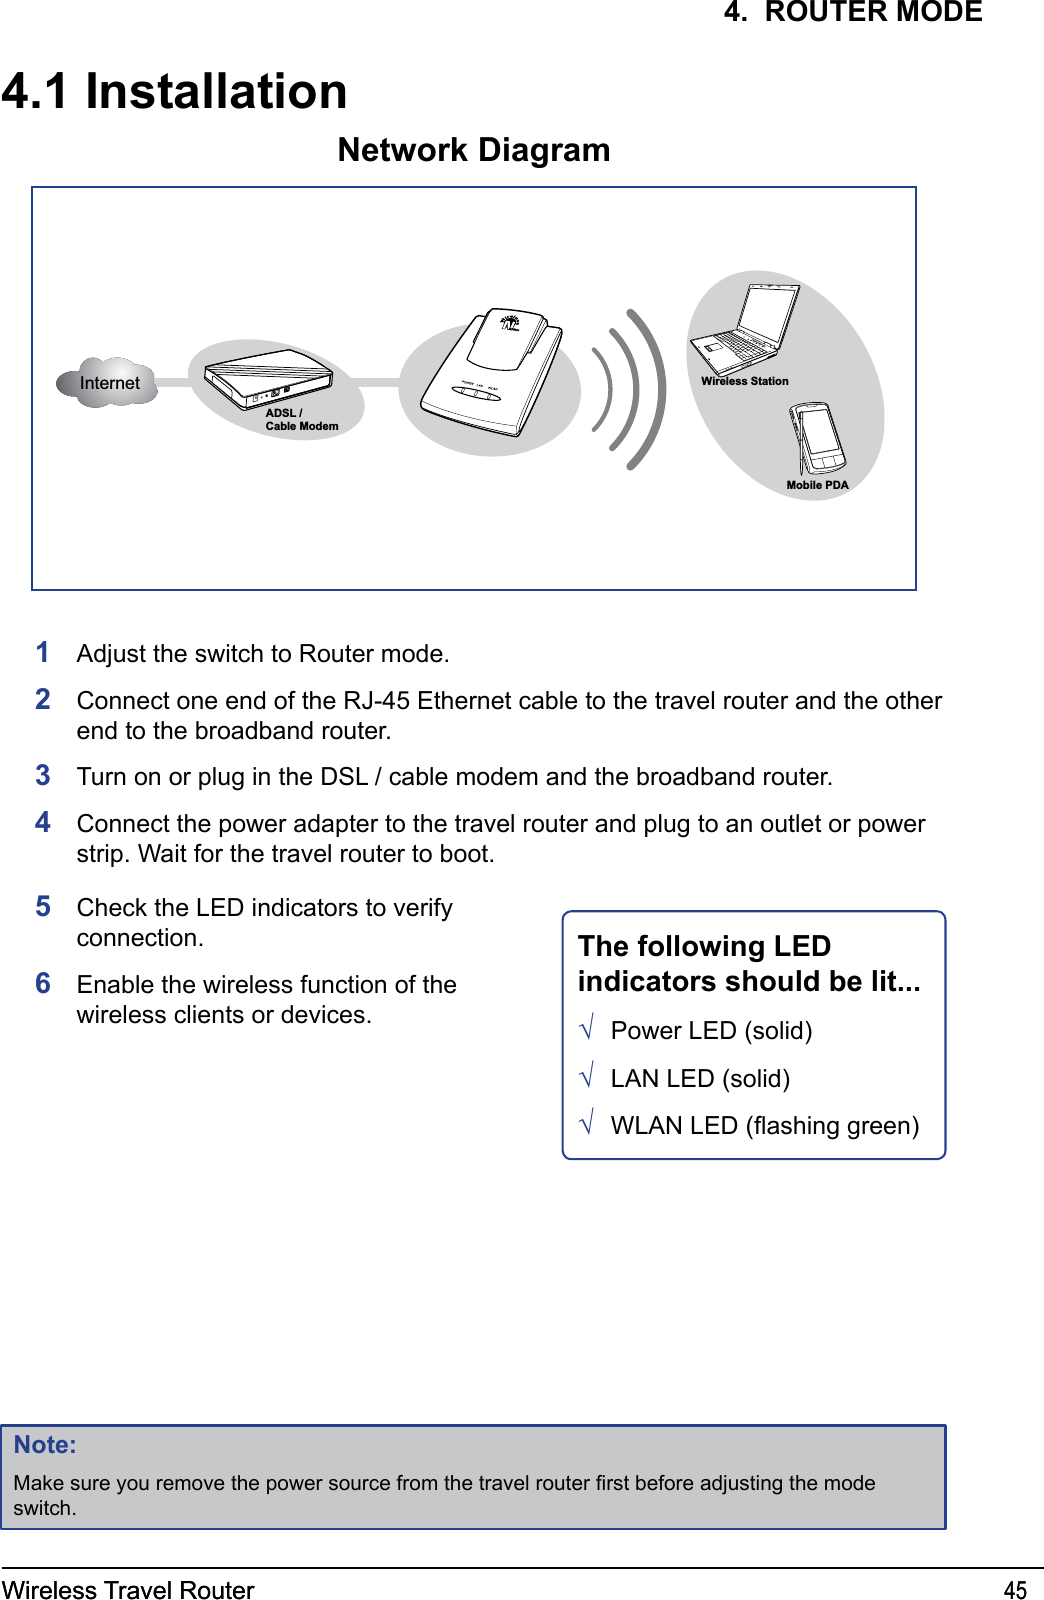 Wireless Travel Router 45Wireless Travel Router 454.  ROUTER MODE4.1 InstallationInternetADSL /Cable ModemWireless StationMobile PDANetwork DiagramThe following LED indicators should be lit...Power LED (solid)LAN LED (solid)WLAN LED (ashing green)√√√1  Adjust the switch to Router mode. 2  Connect one end of the RJ-45 Ethernet cable to the travel router and the other end to the broadband router.3  Turn on or plug in the DSL / cable modem and the broadband router.4  Connect the power adapter to the travel router and plug to an outlet or power strip. Wait for the travel router to boot.5  Check the LED indicators to verify connection.6  Enable the wireless function of the wireless clients or devices.Note:Make sure you remove the power source from the travel router rst before adjusting the mode switch.